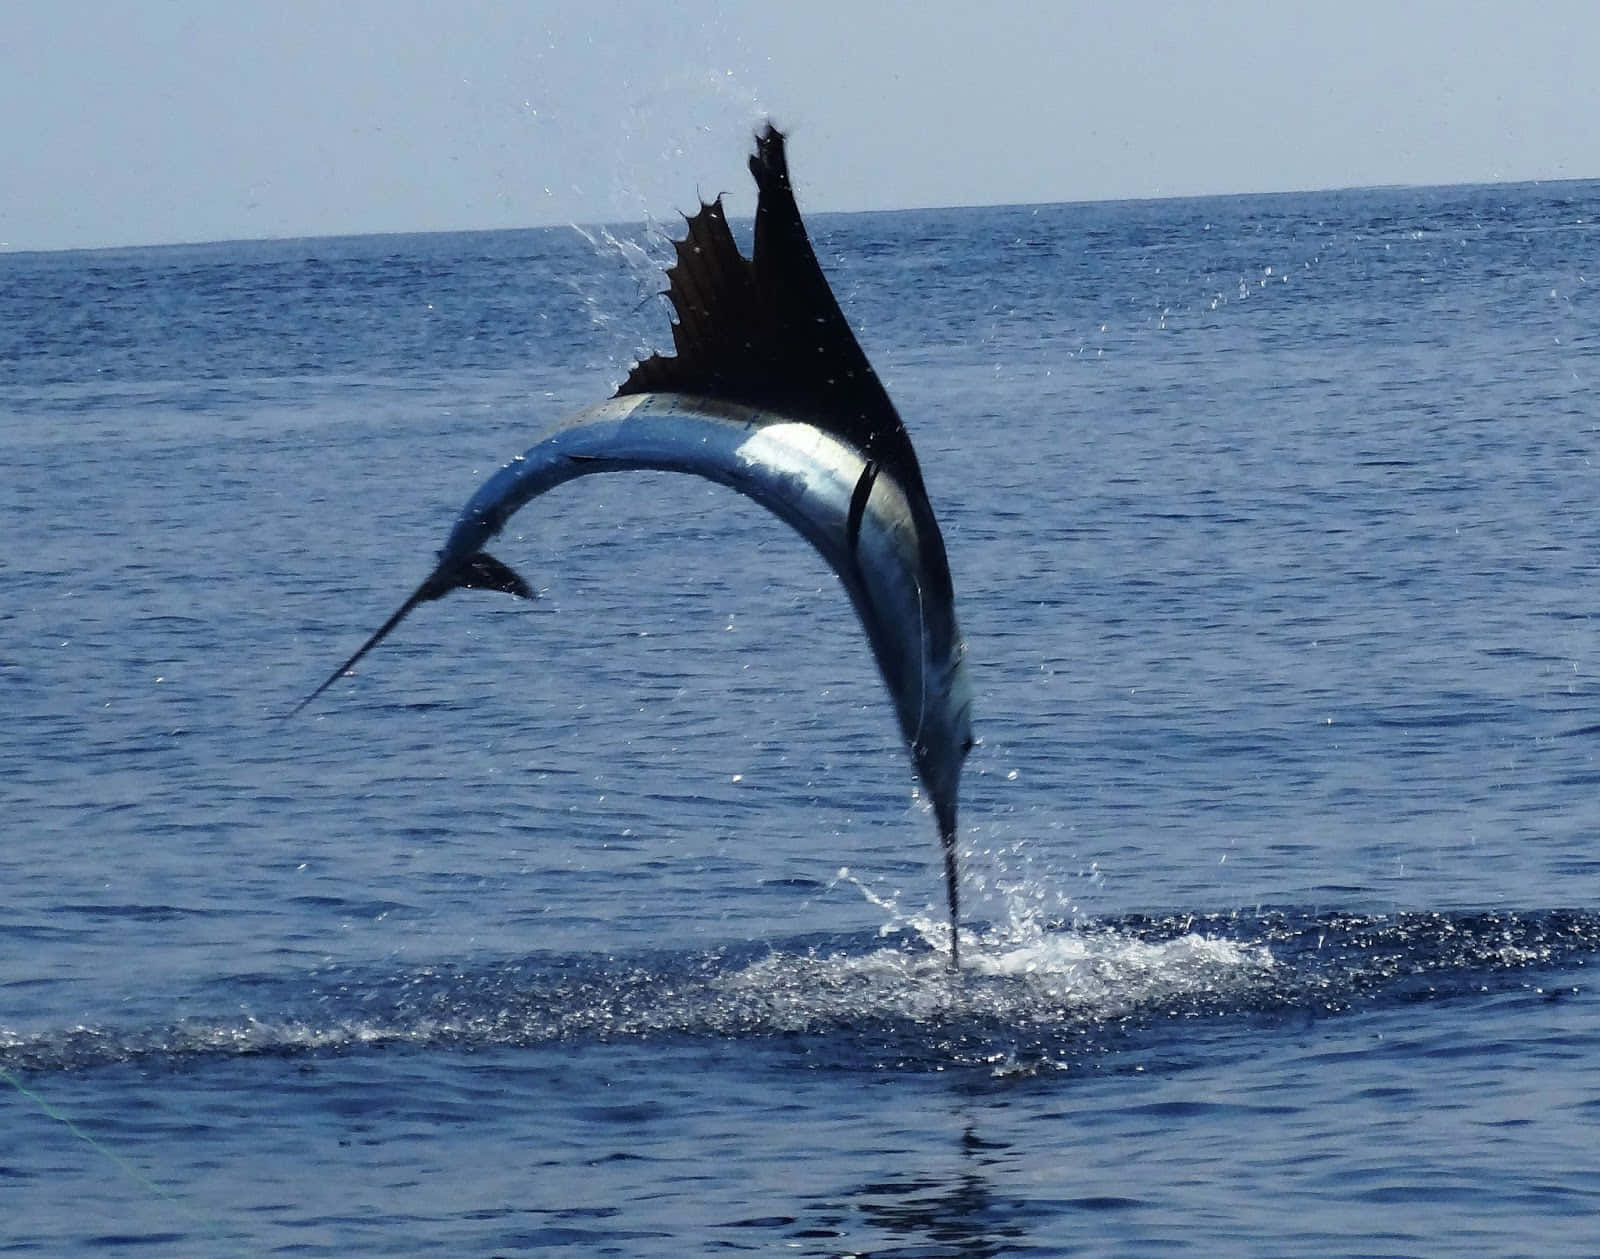 Enjoy the beauty of a sailfish in the wild